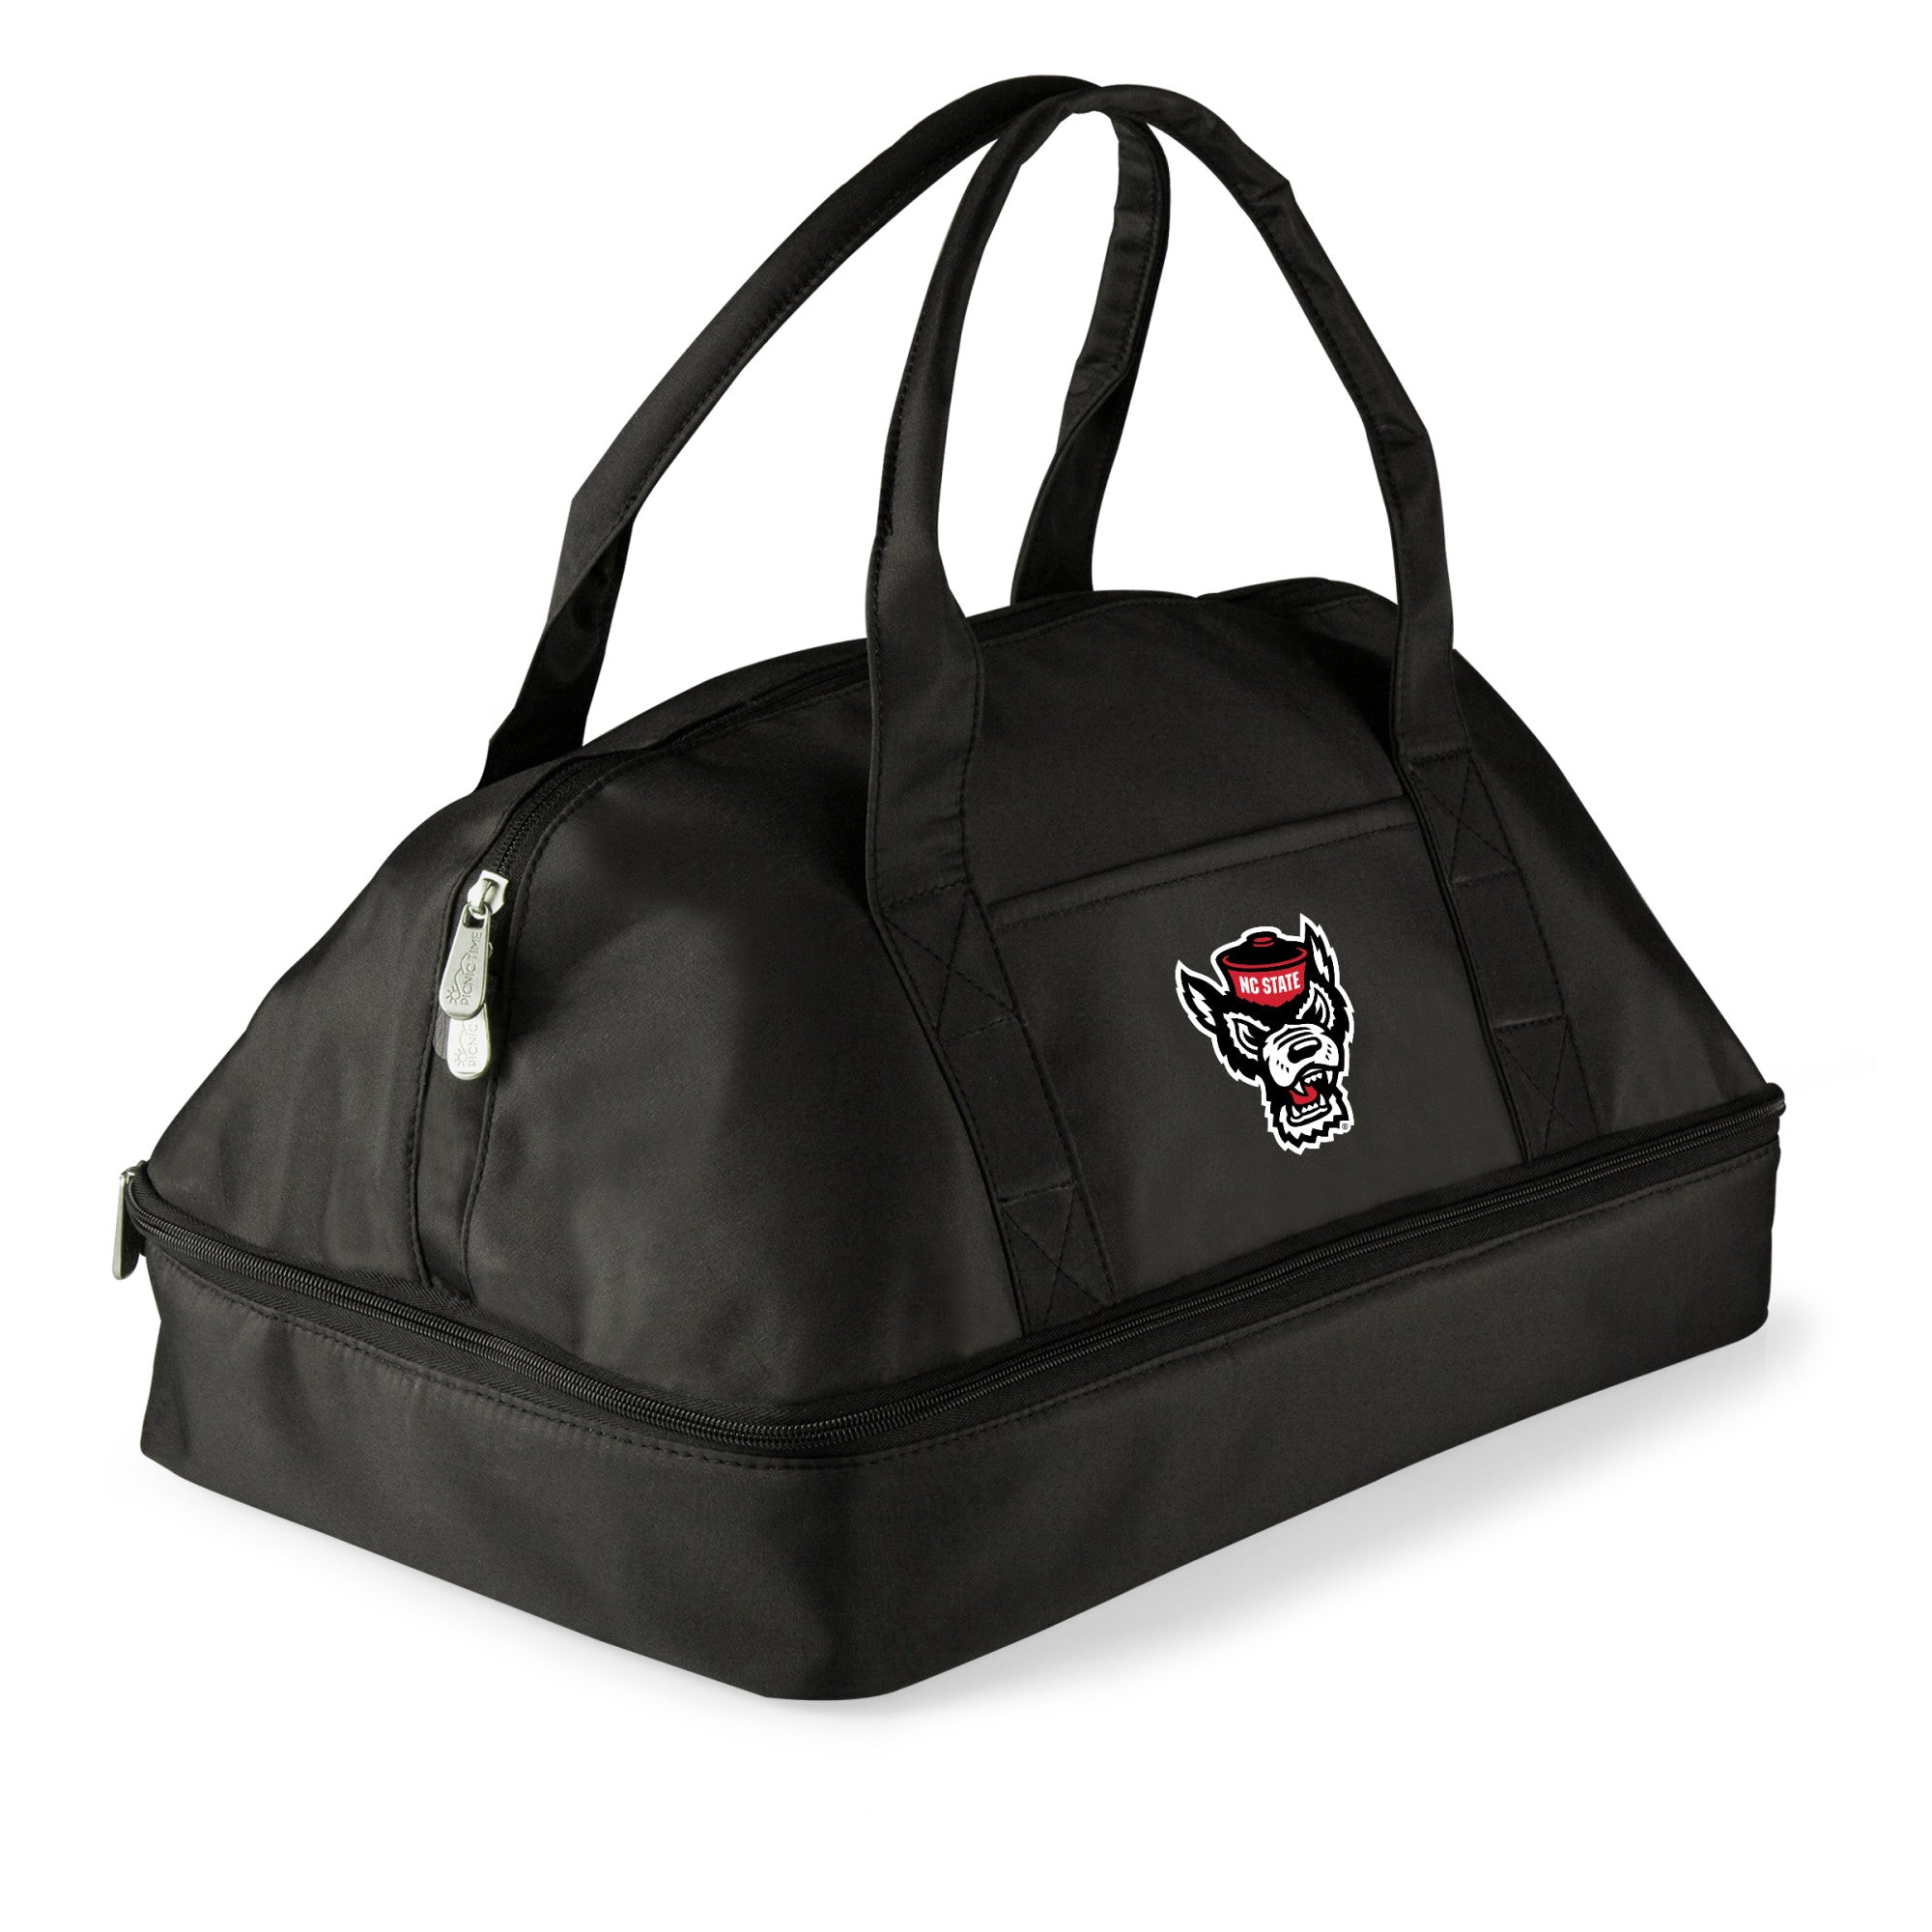 NC State Wolfpack - Potluck Casserole Tote